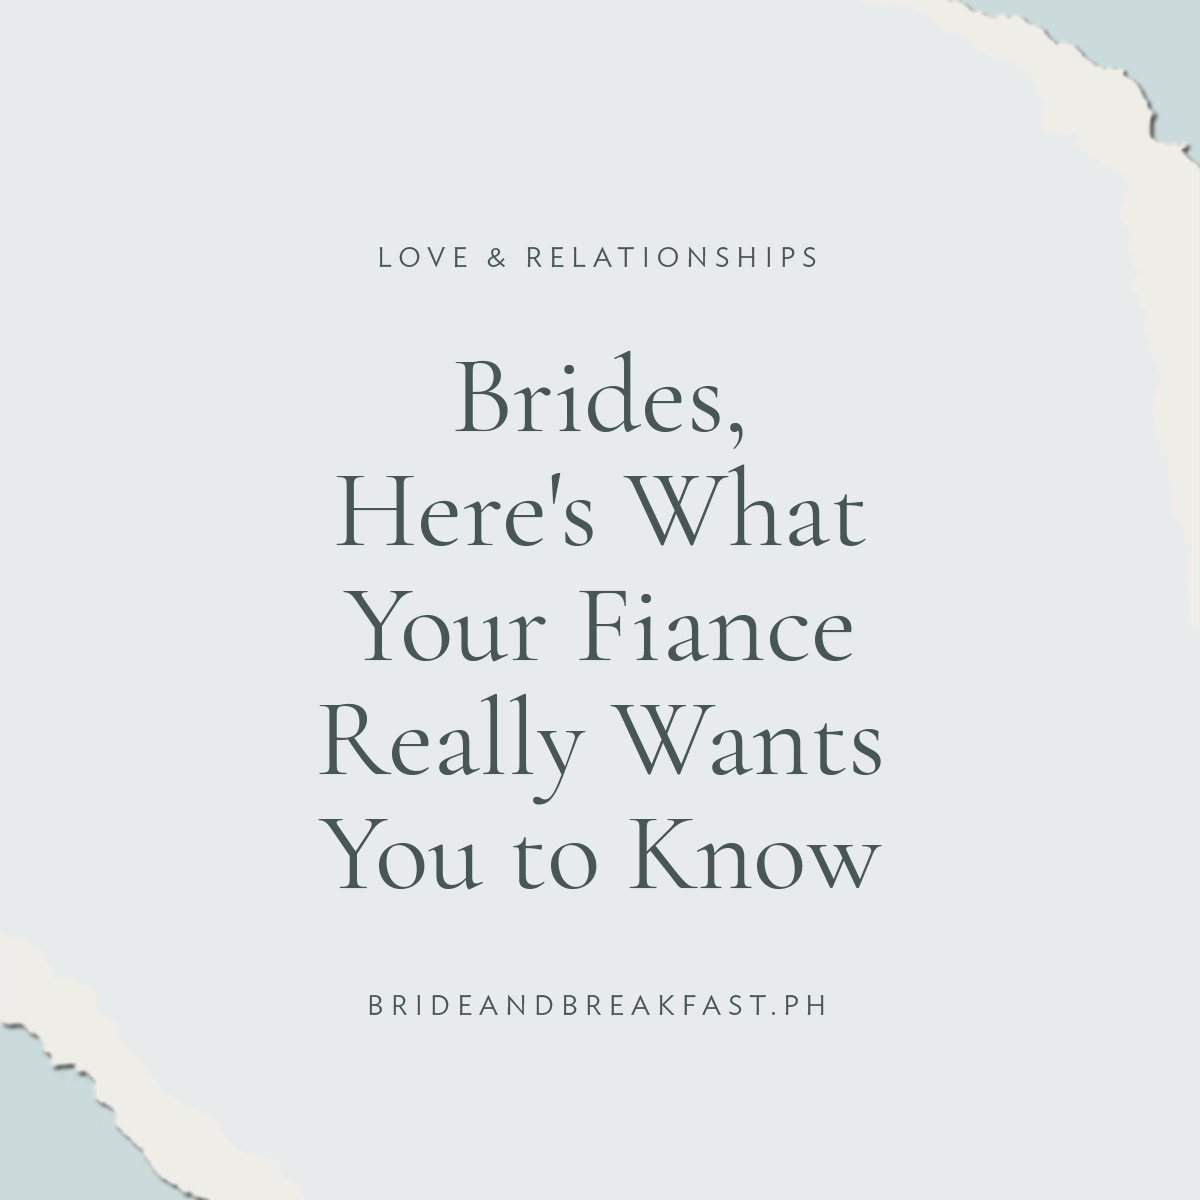 Brides, Here's What Your Fiance Really Wants You to Know